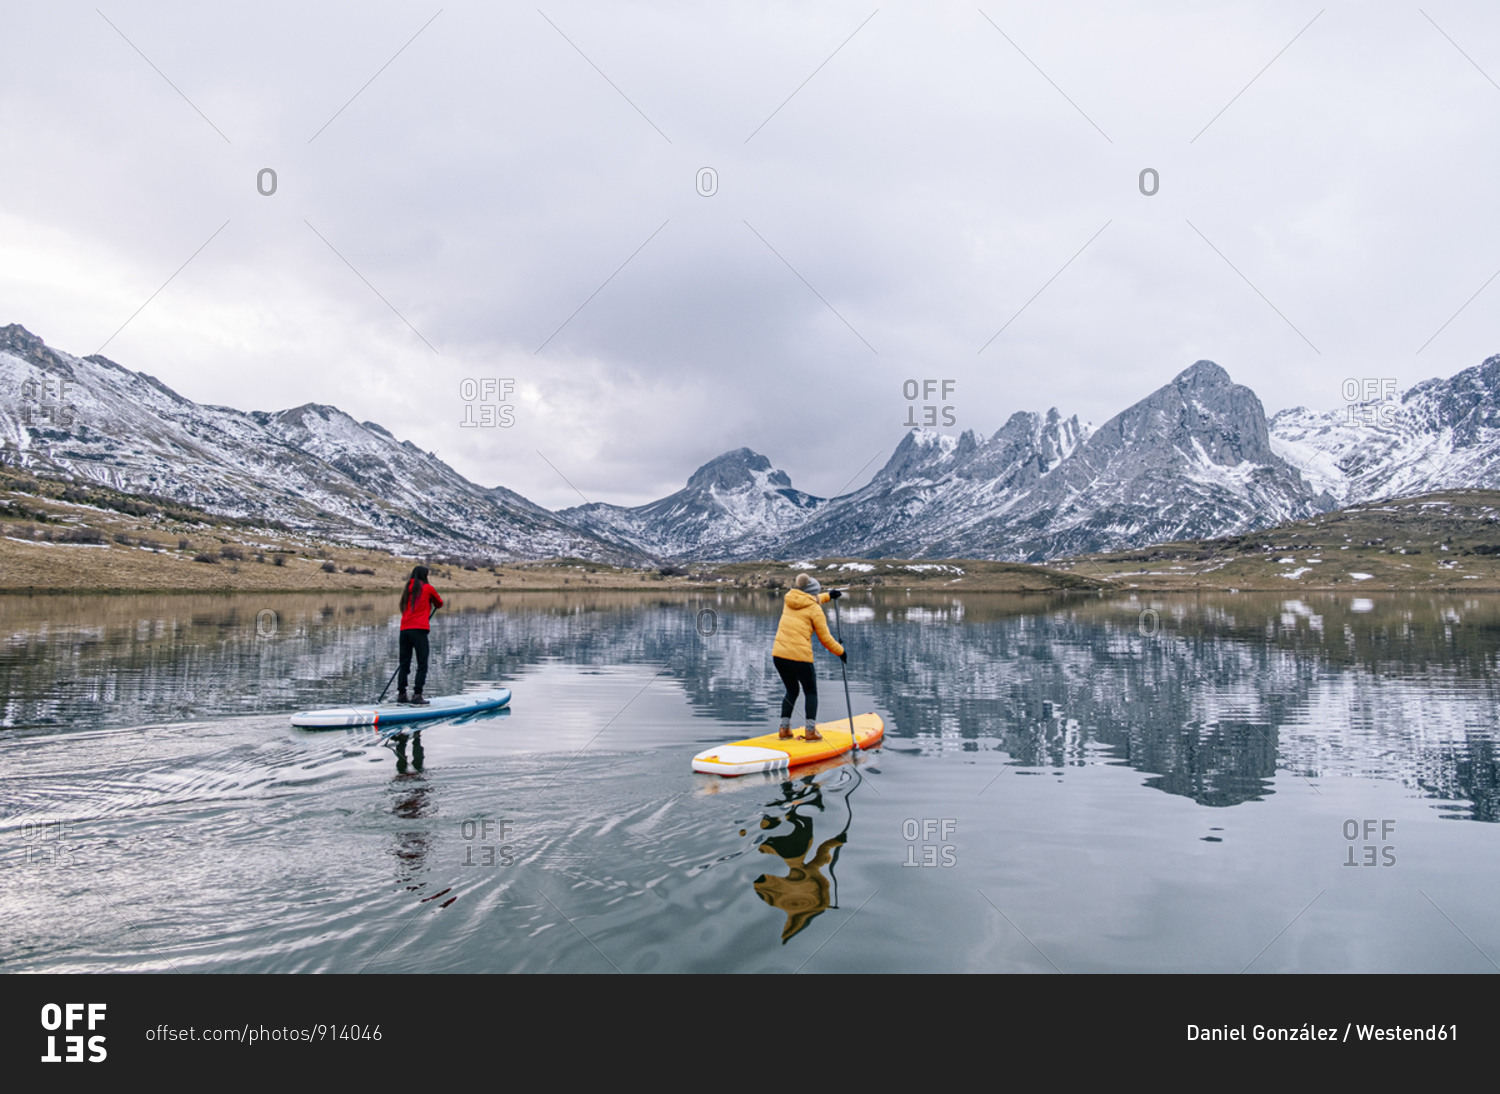 Stand up paddle surfing- Leon- Spain stock photo -
OFFSET